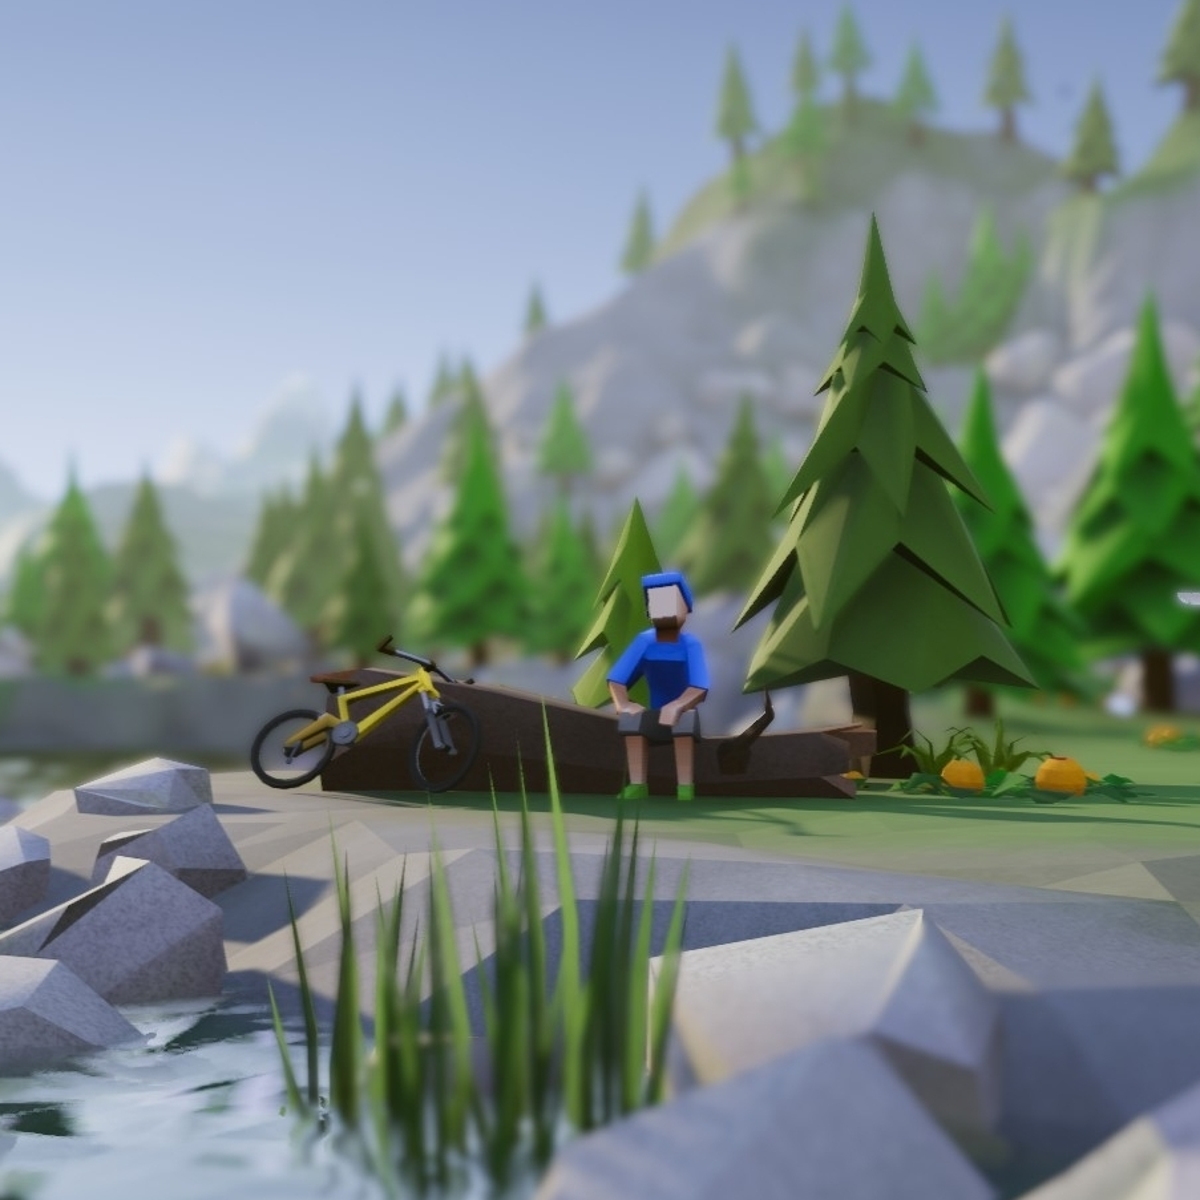 Games of the Year 2019: Lonely Mountains: Downhill is a magic game of pure  sensation